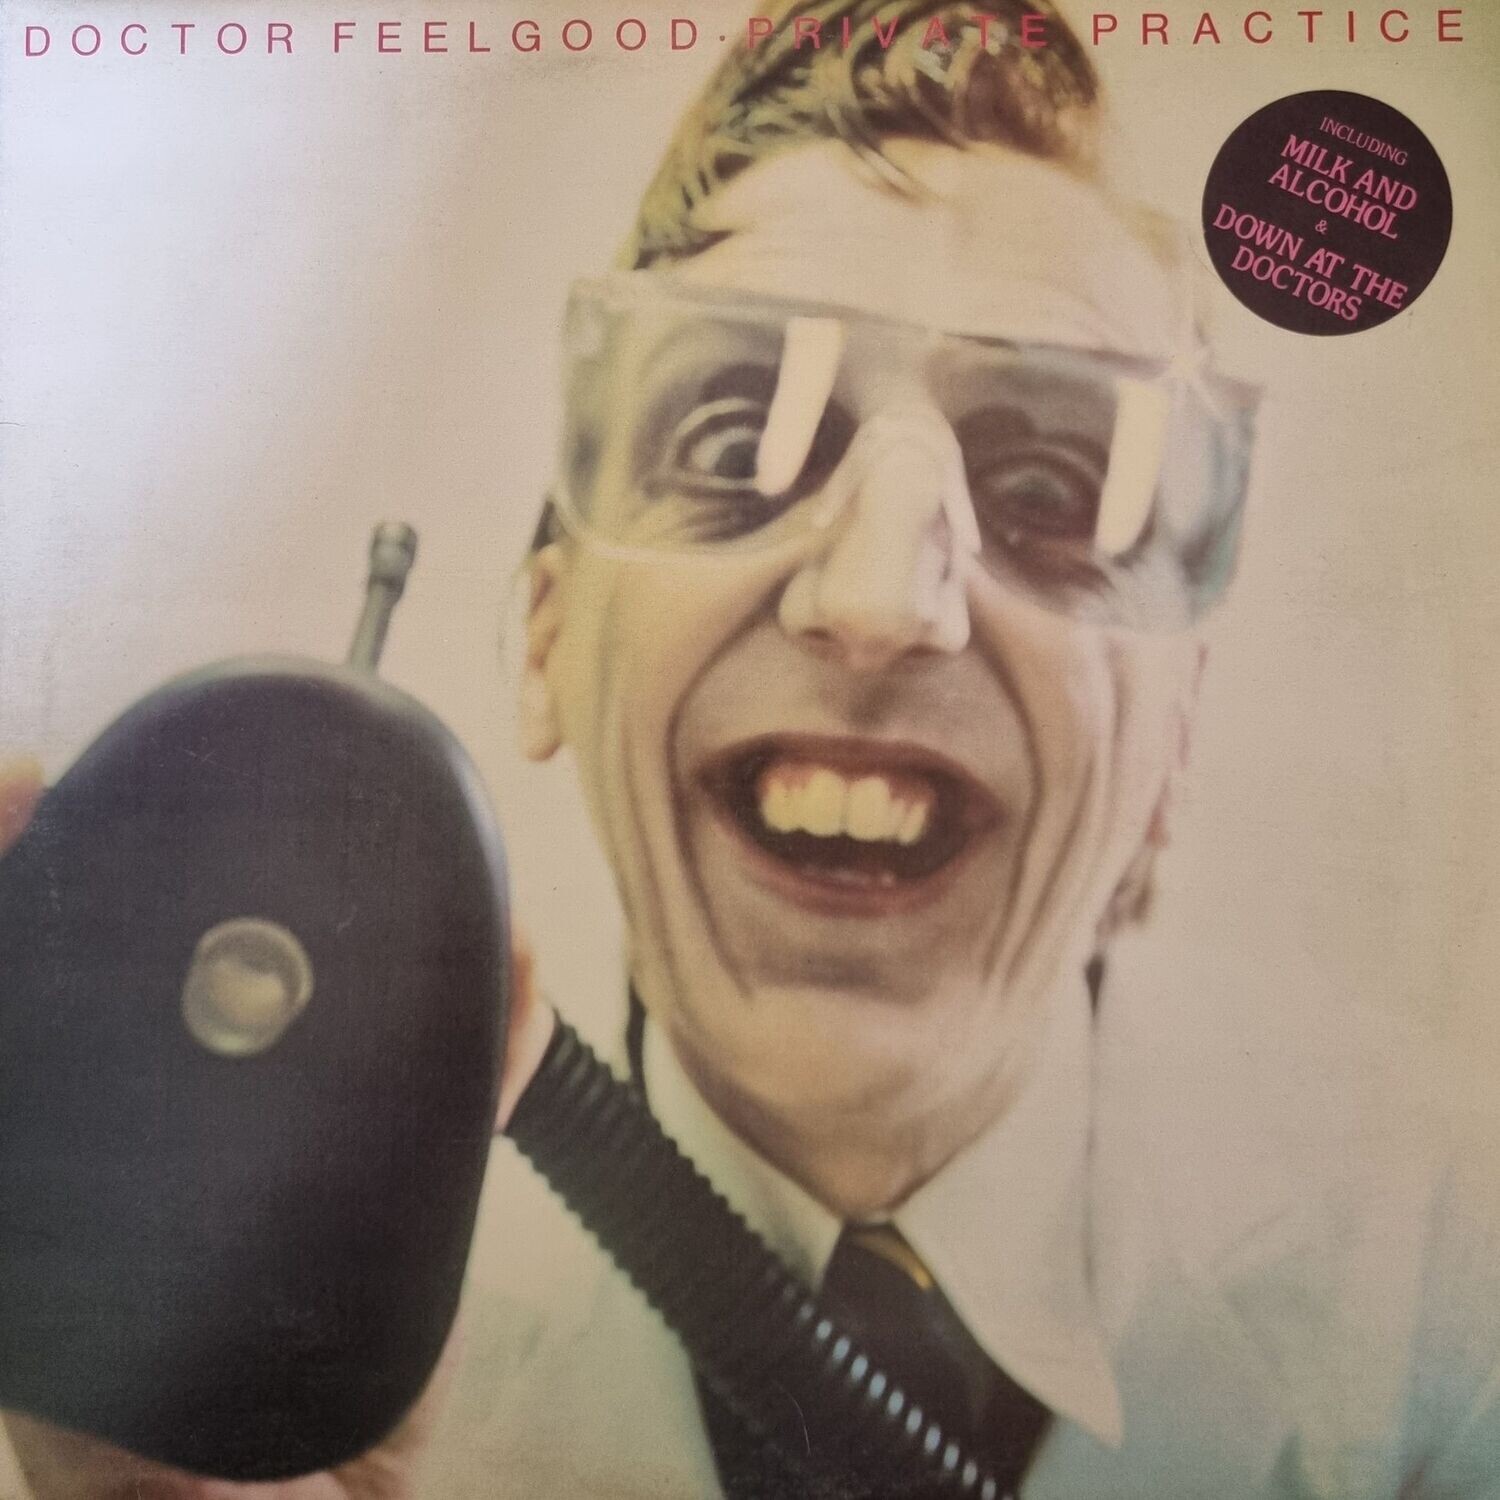 Dr. Feelgood – Private Practice (1978) (UK Pressing)